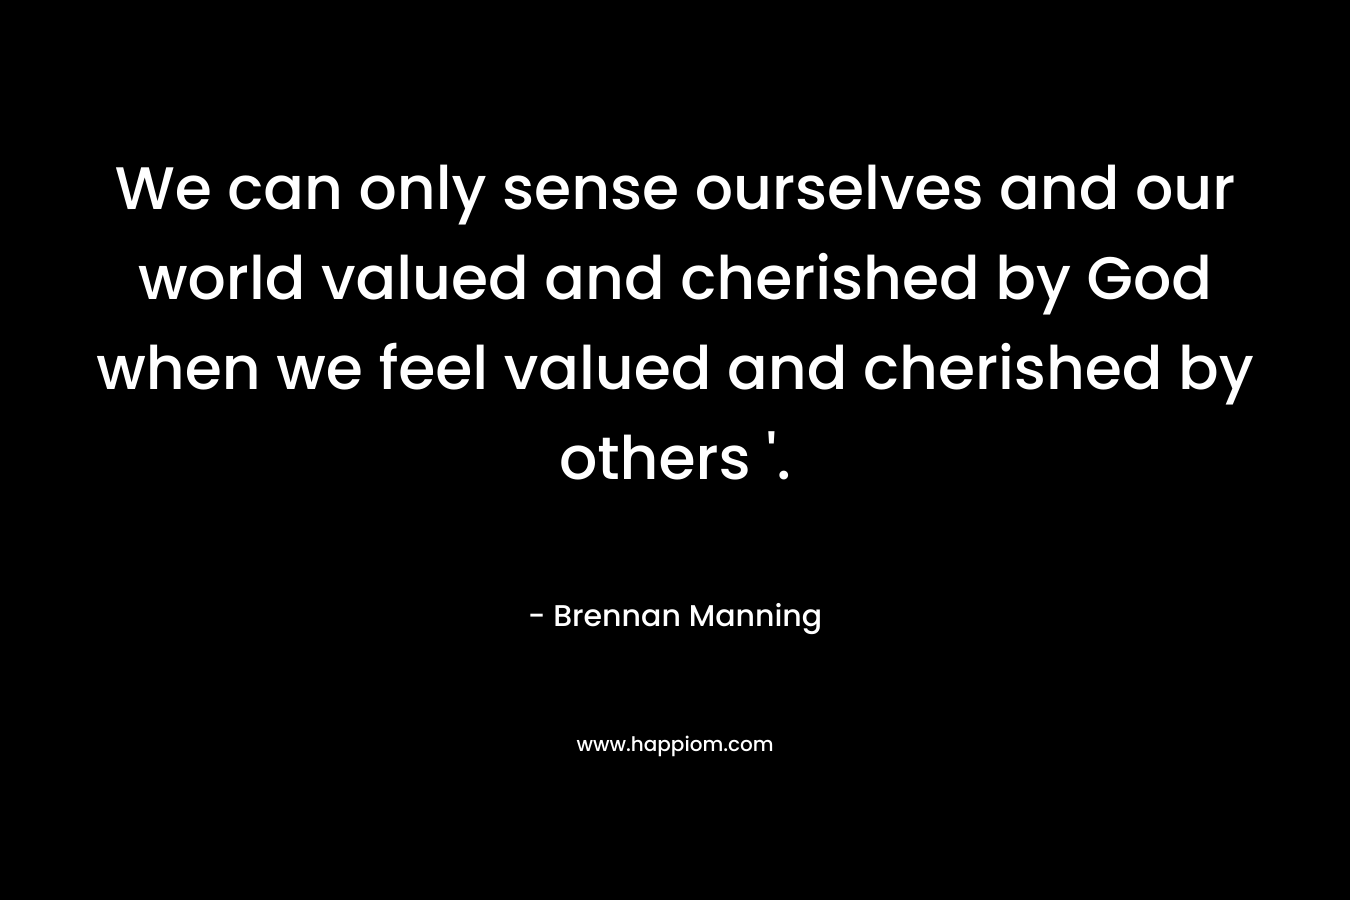 We can only sense ourselves and our world valued and cherished by God when we feel valued and cherished by others ‘. – Brennan Manning